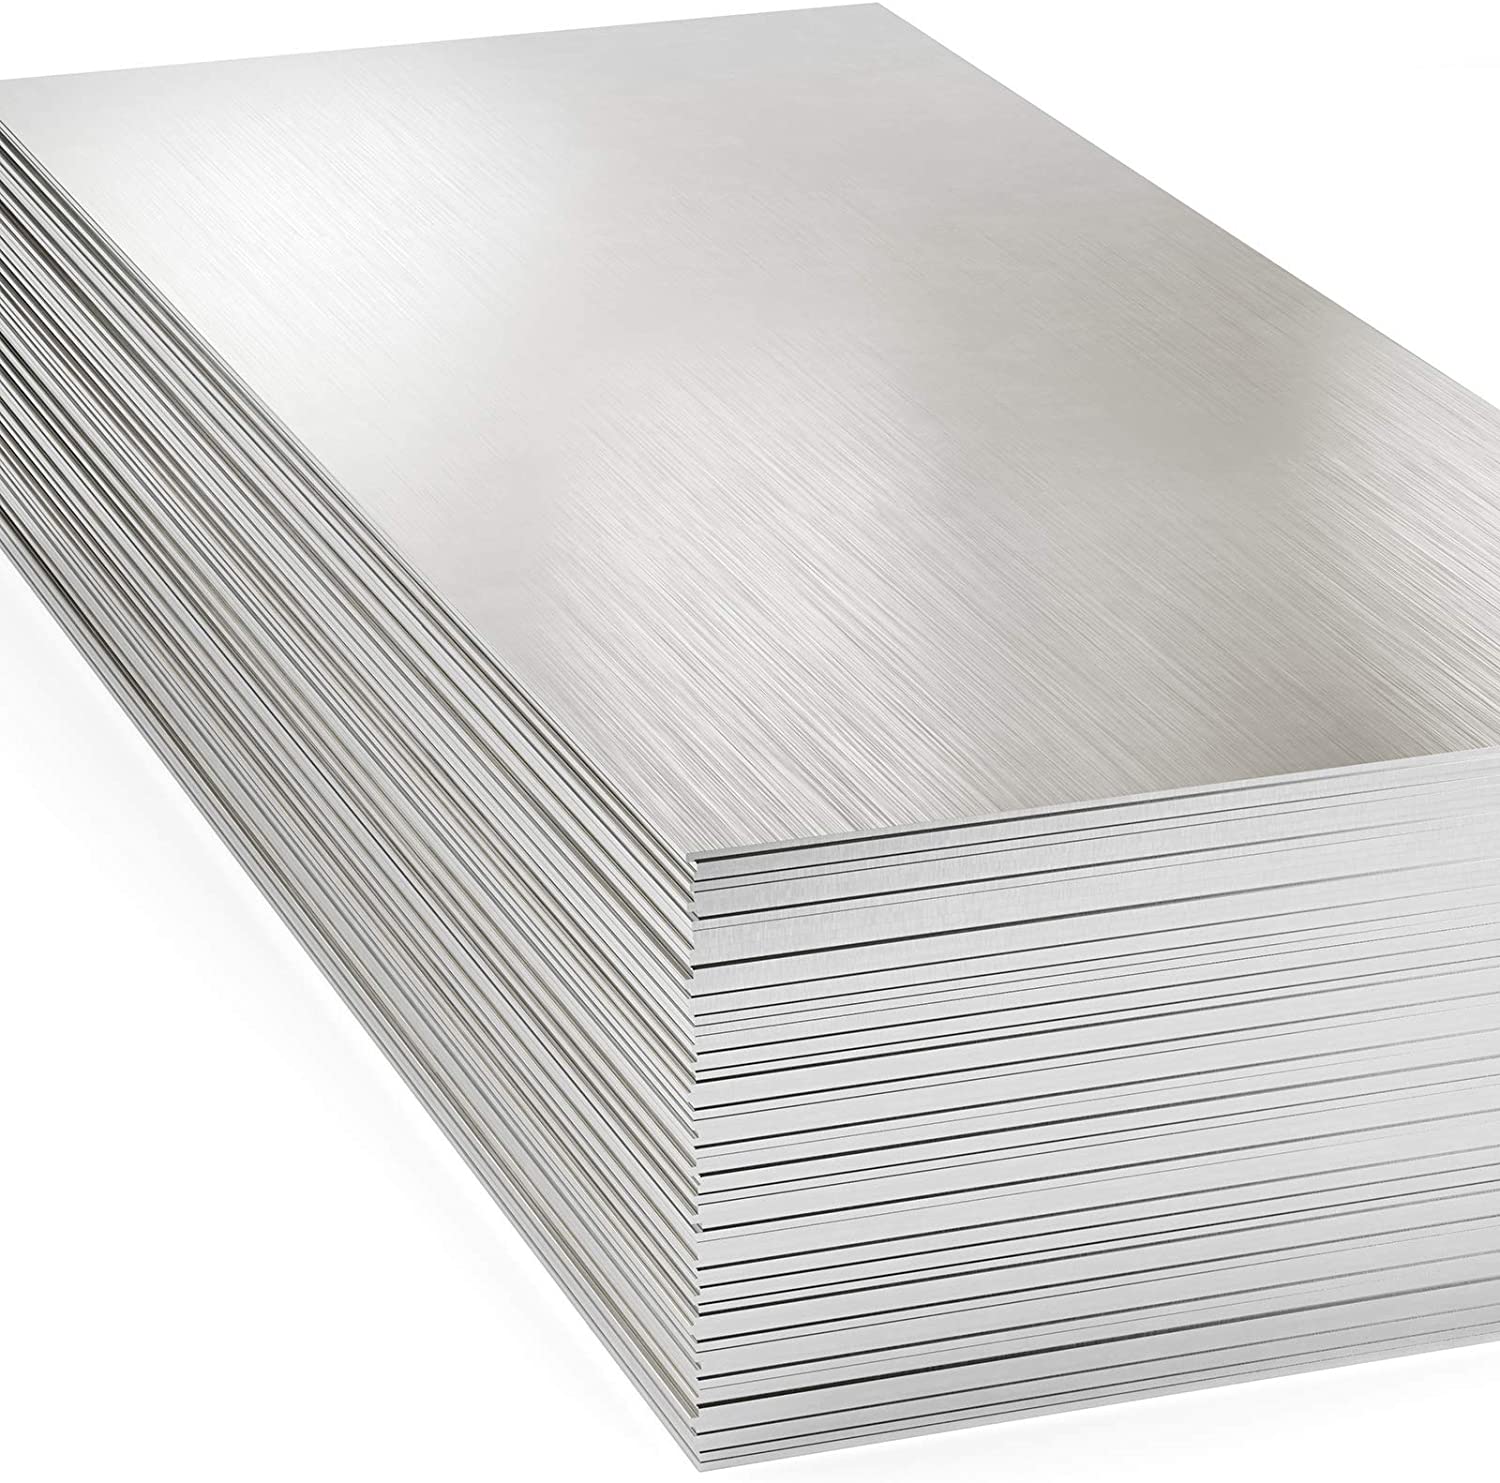 Commonly Asked Questions About Sheet Metal & Steel Plate